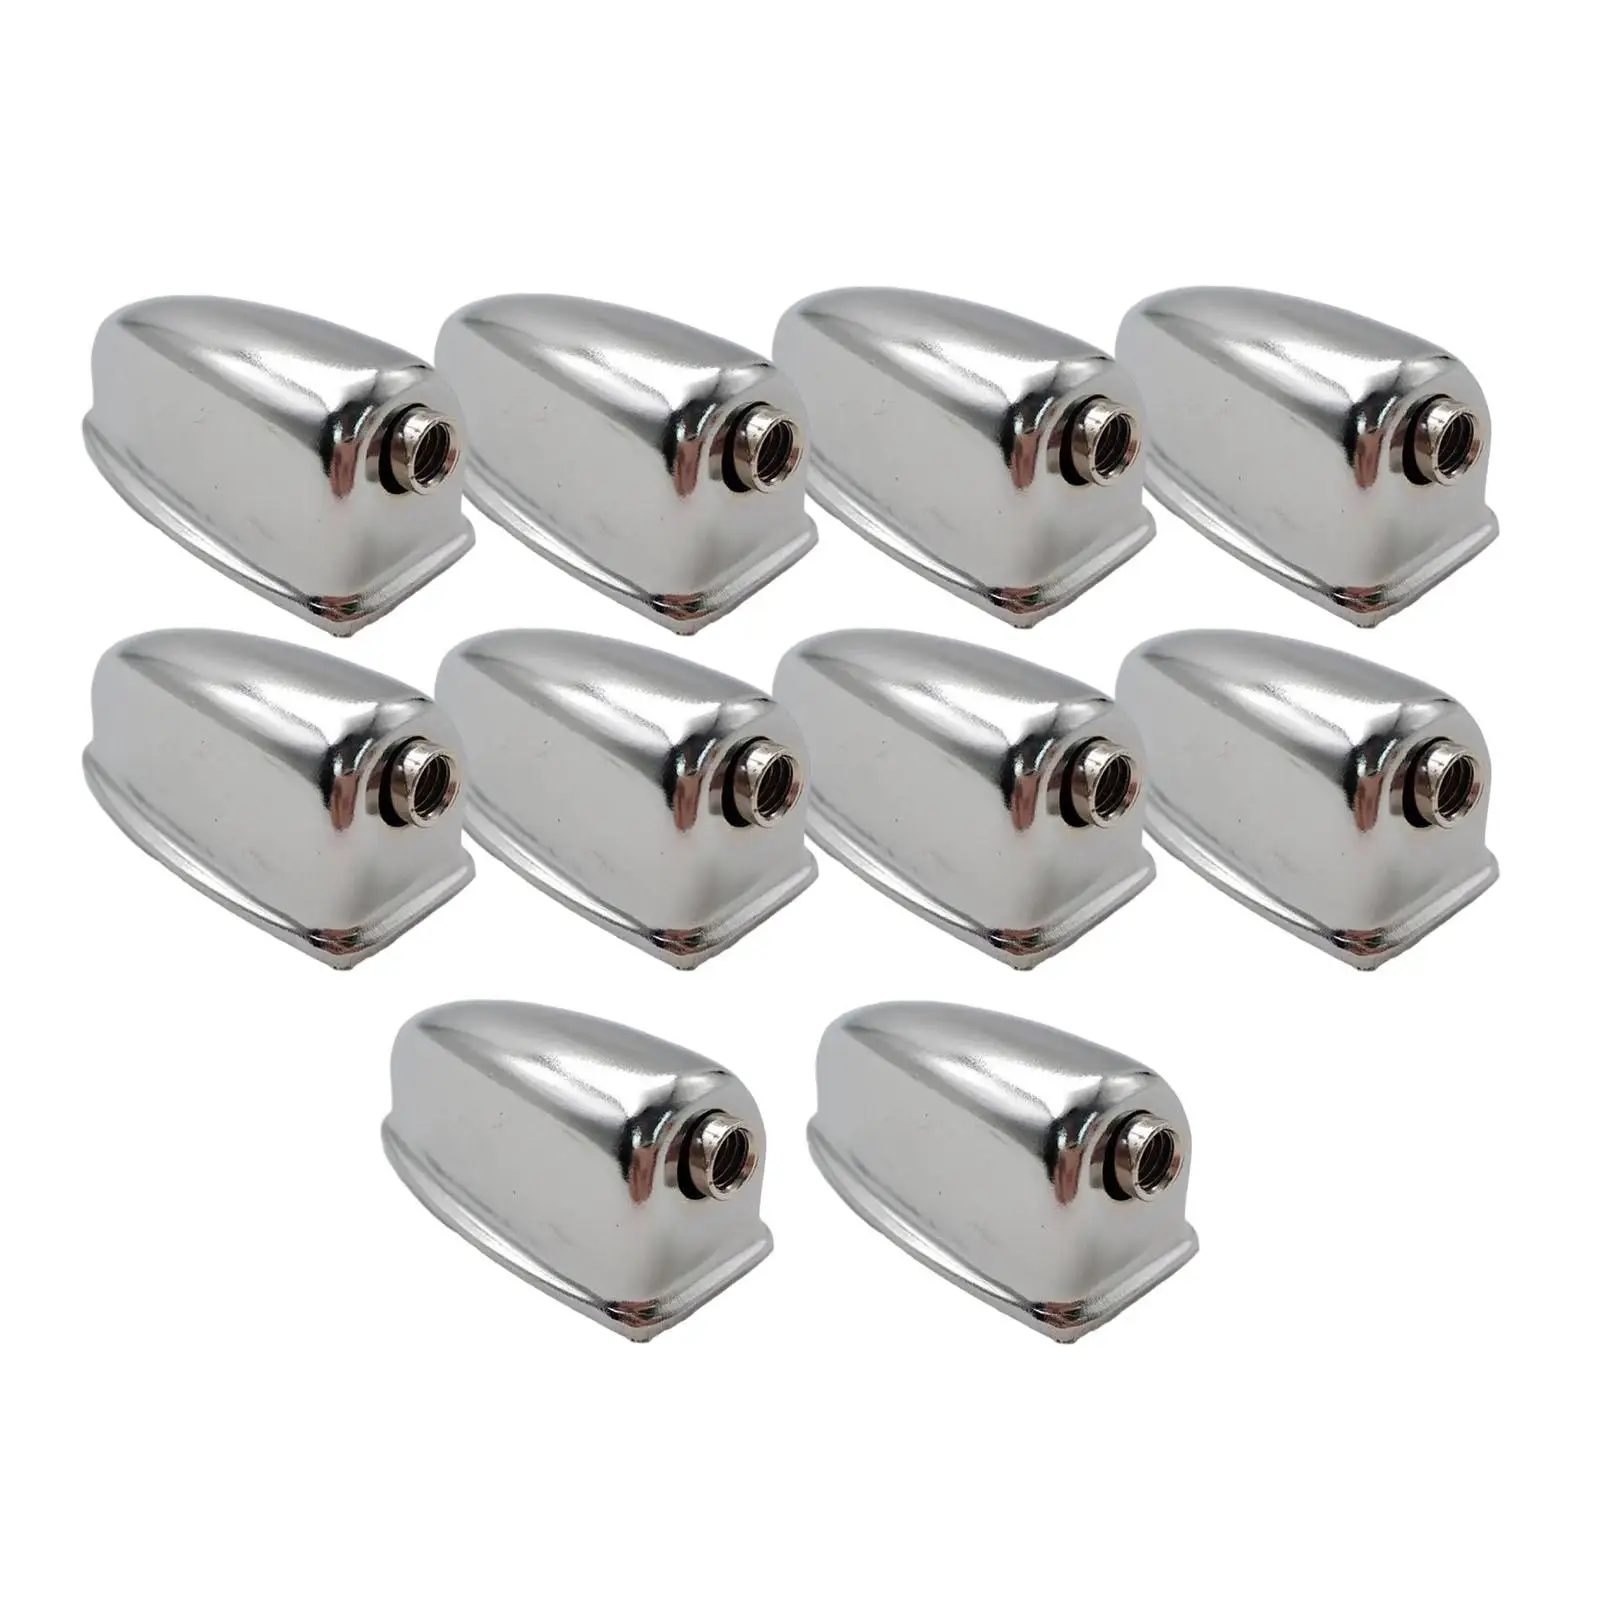 10x Drum Set Lug Snare Drum Parts Portable Easy to Install Drums Ear Metal Lugs for Musical Instrument Repairing Replacement